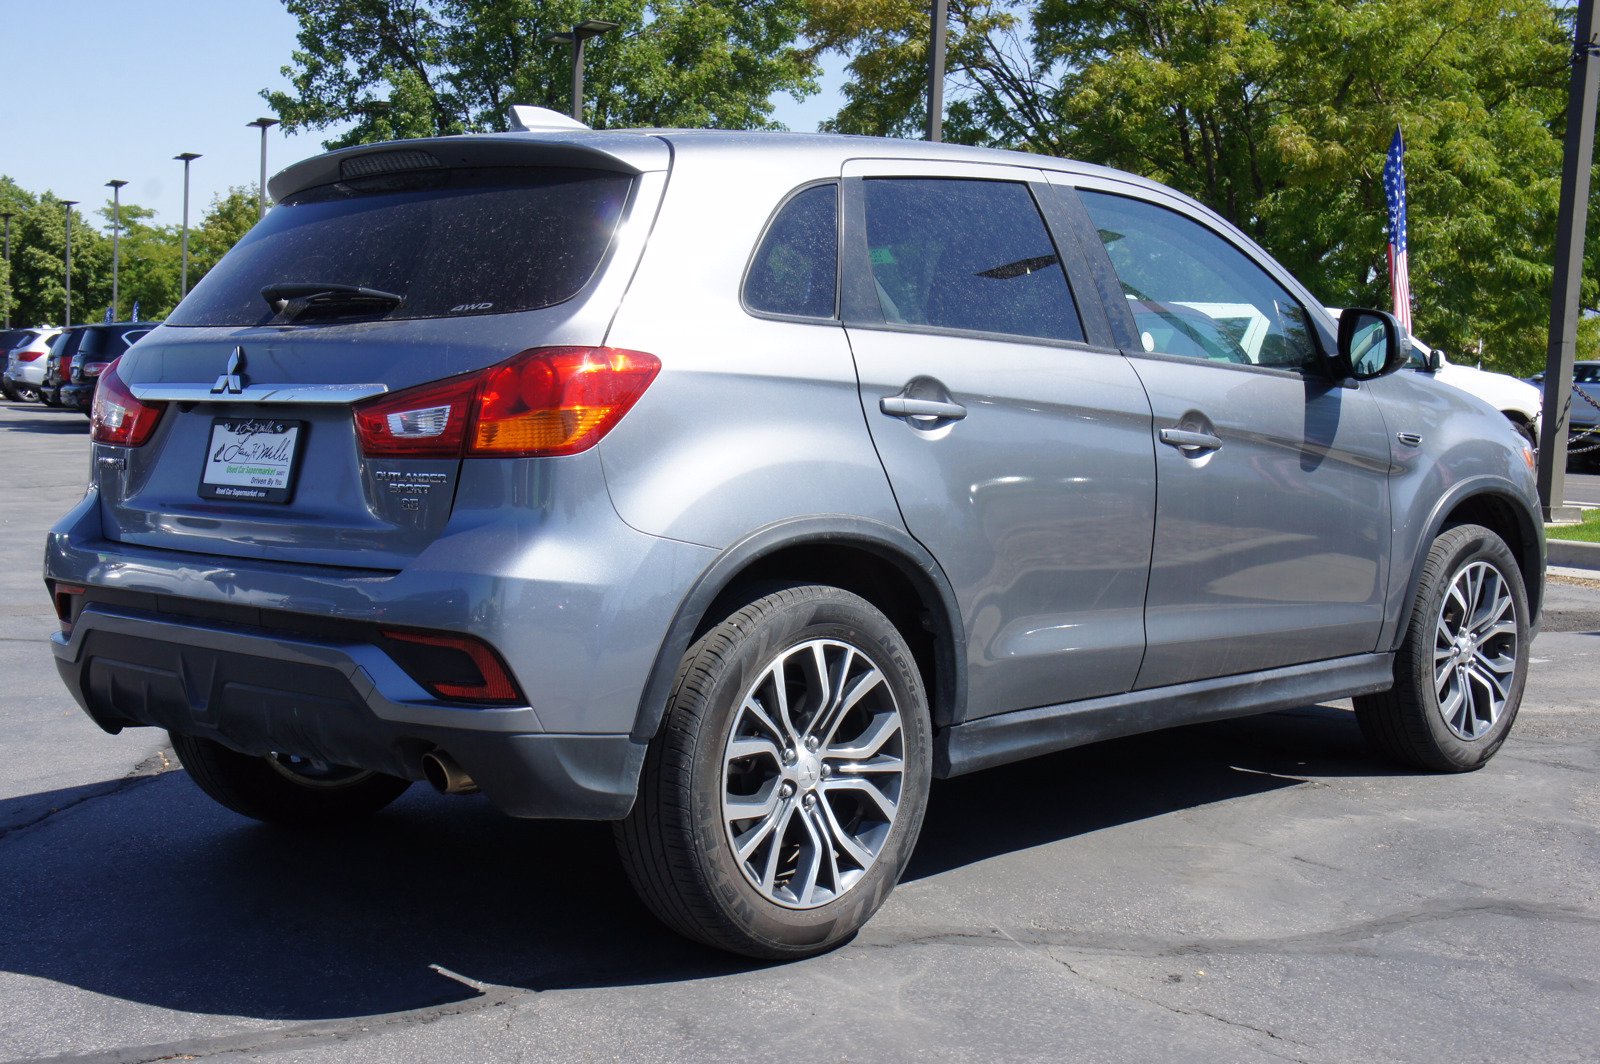 PreOwned 2019 Mitsubishi Outlander Sport Sport Utility in